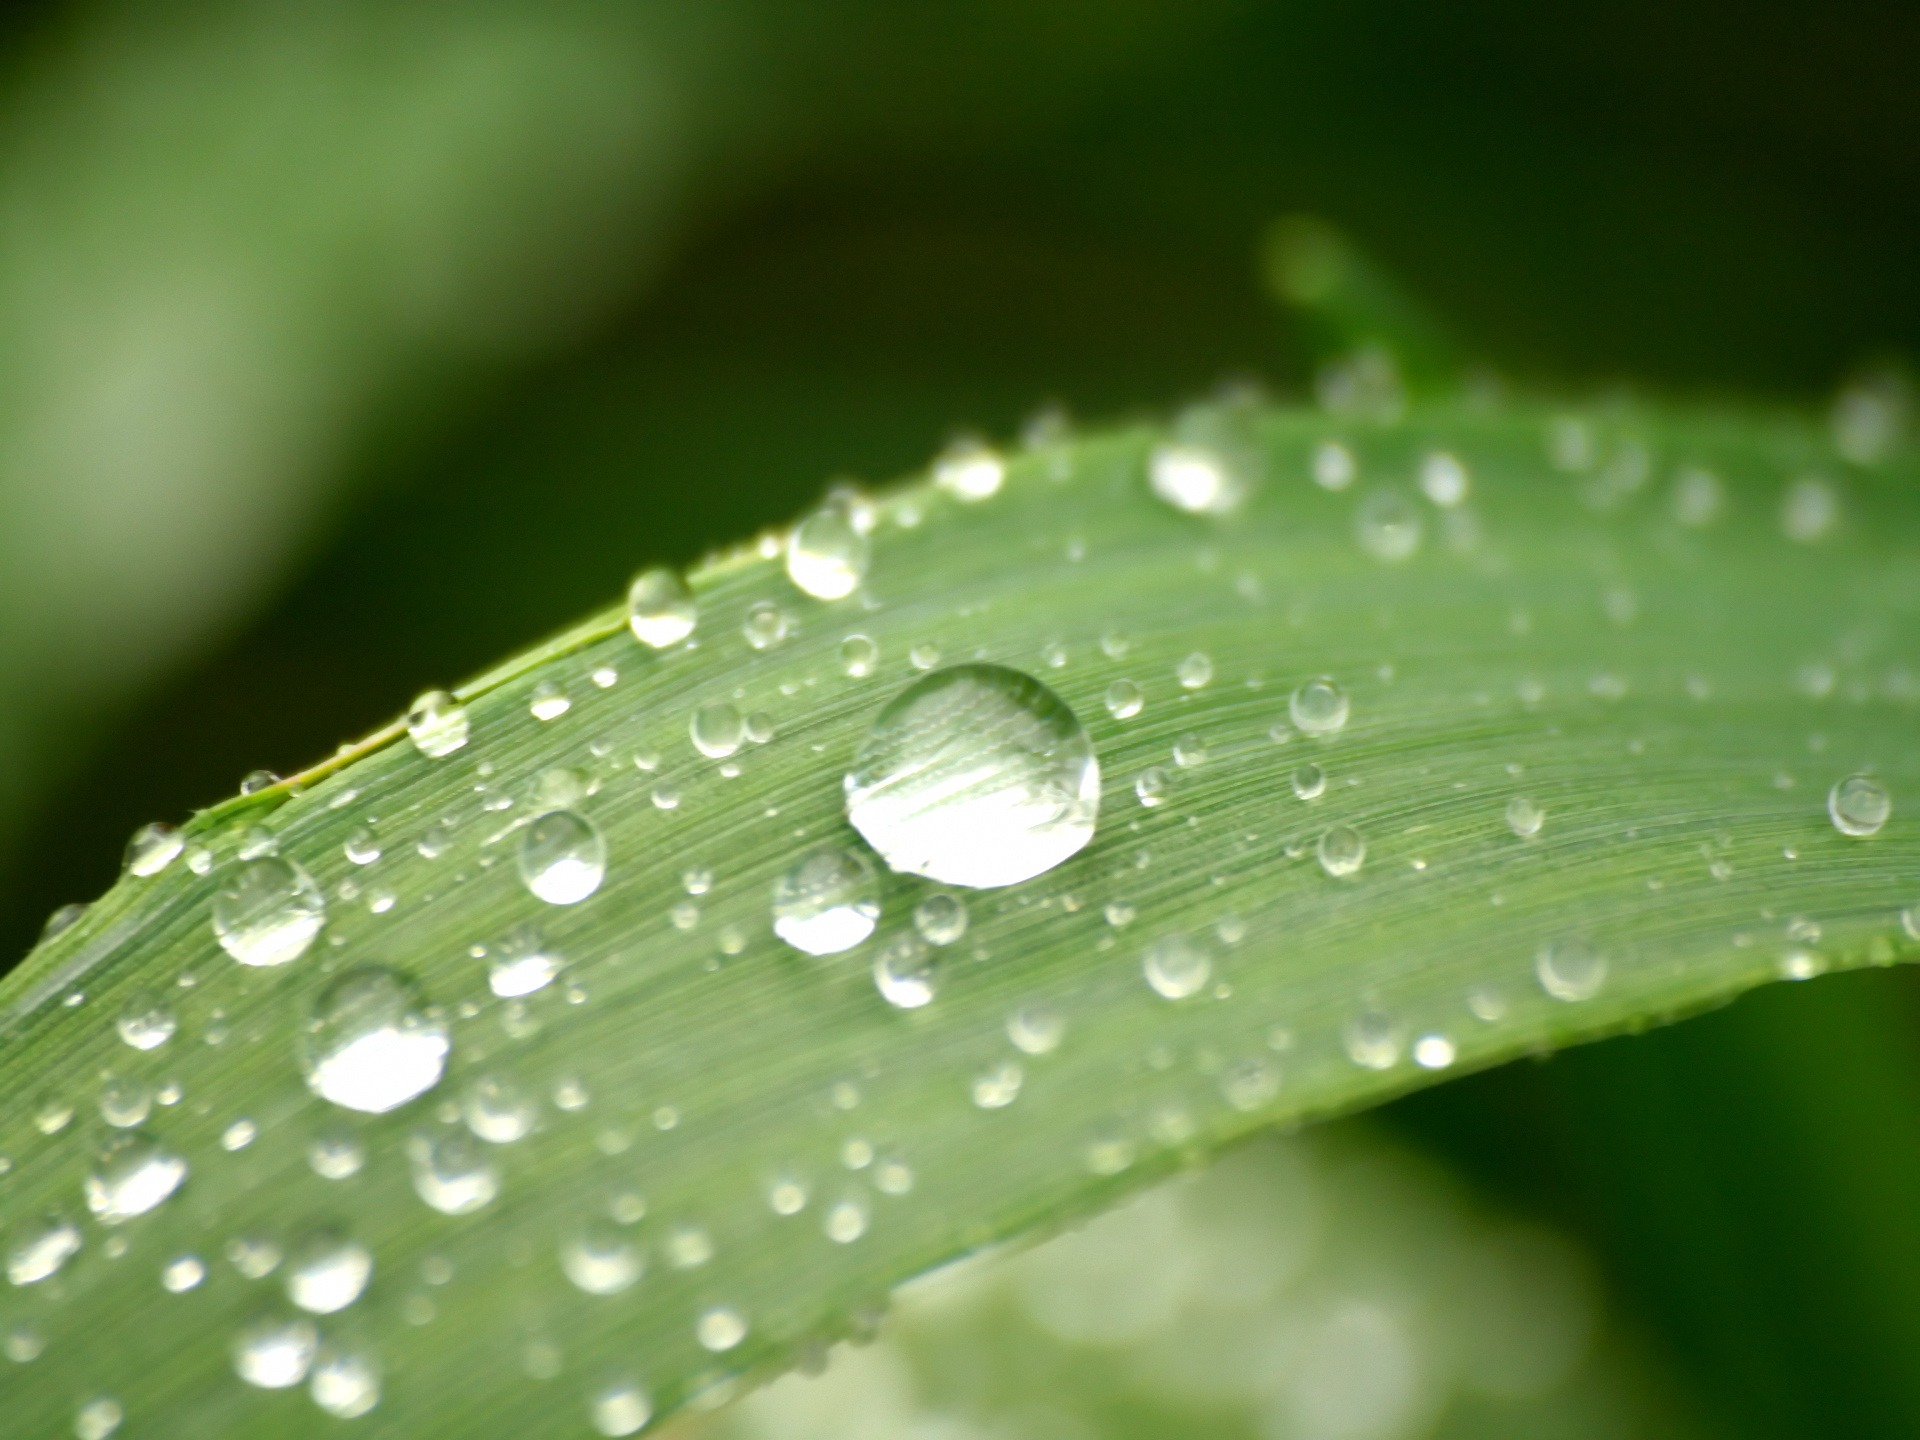 Leaf drops Wallpaper Plants Nature Wallpapers in jpg format for free ...